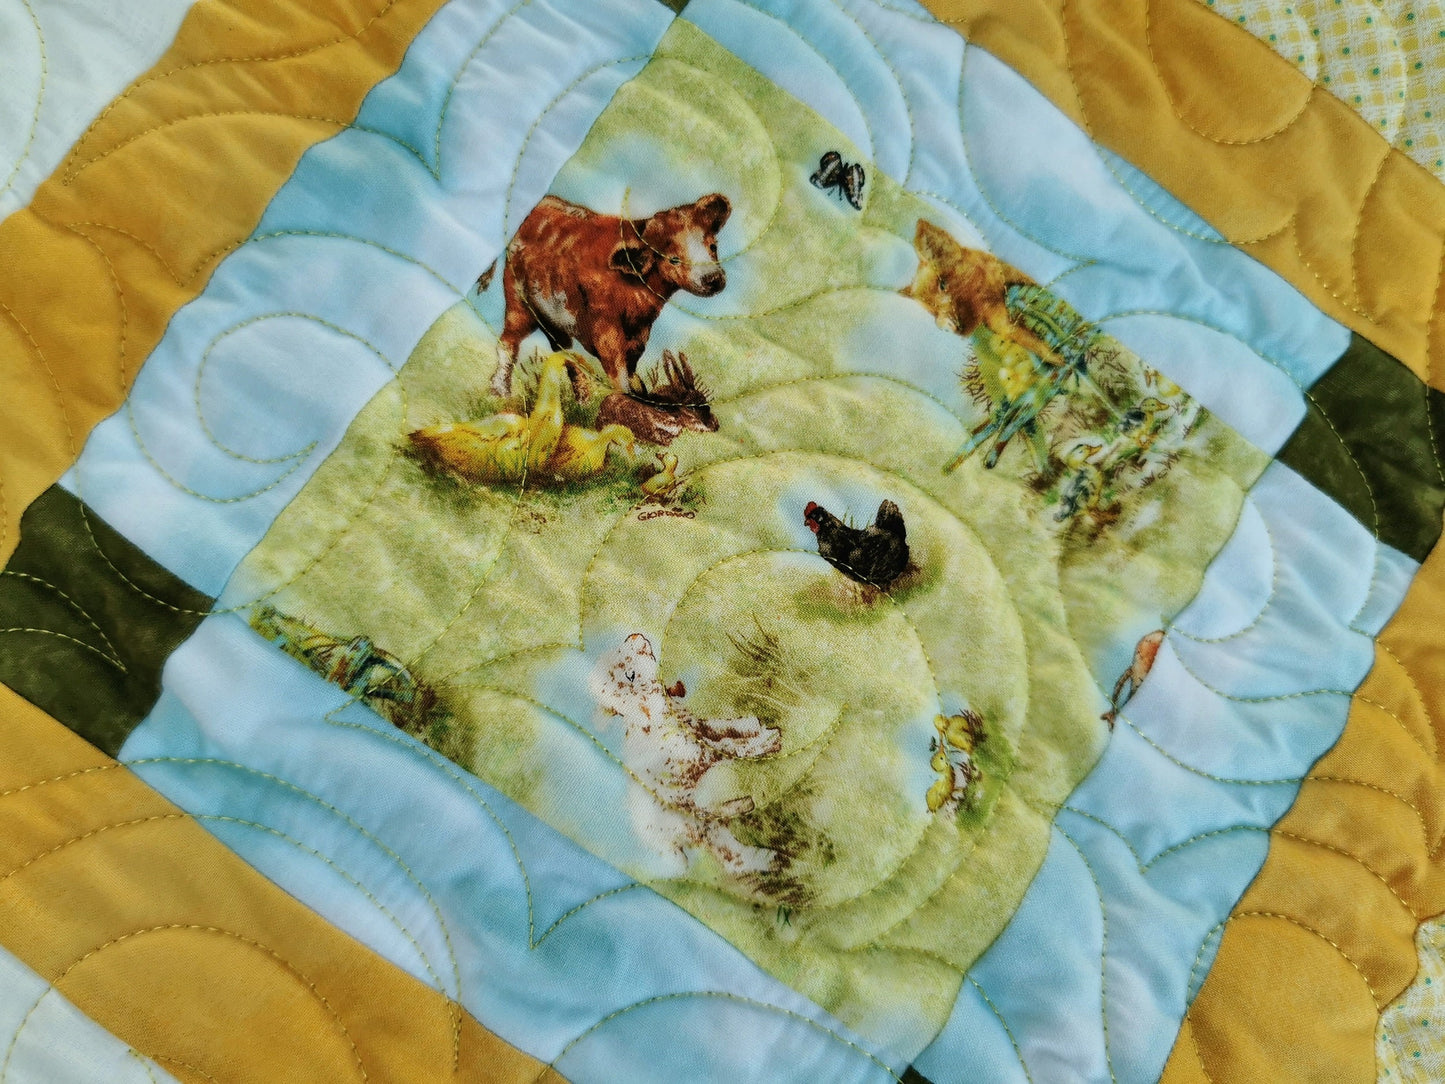 Farm Animal Baby Quilt with Soft Cuddle Back, Gender Neutral